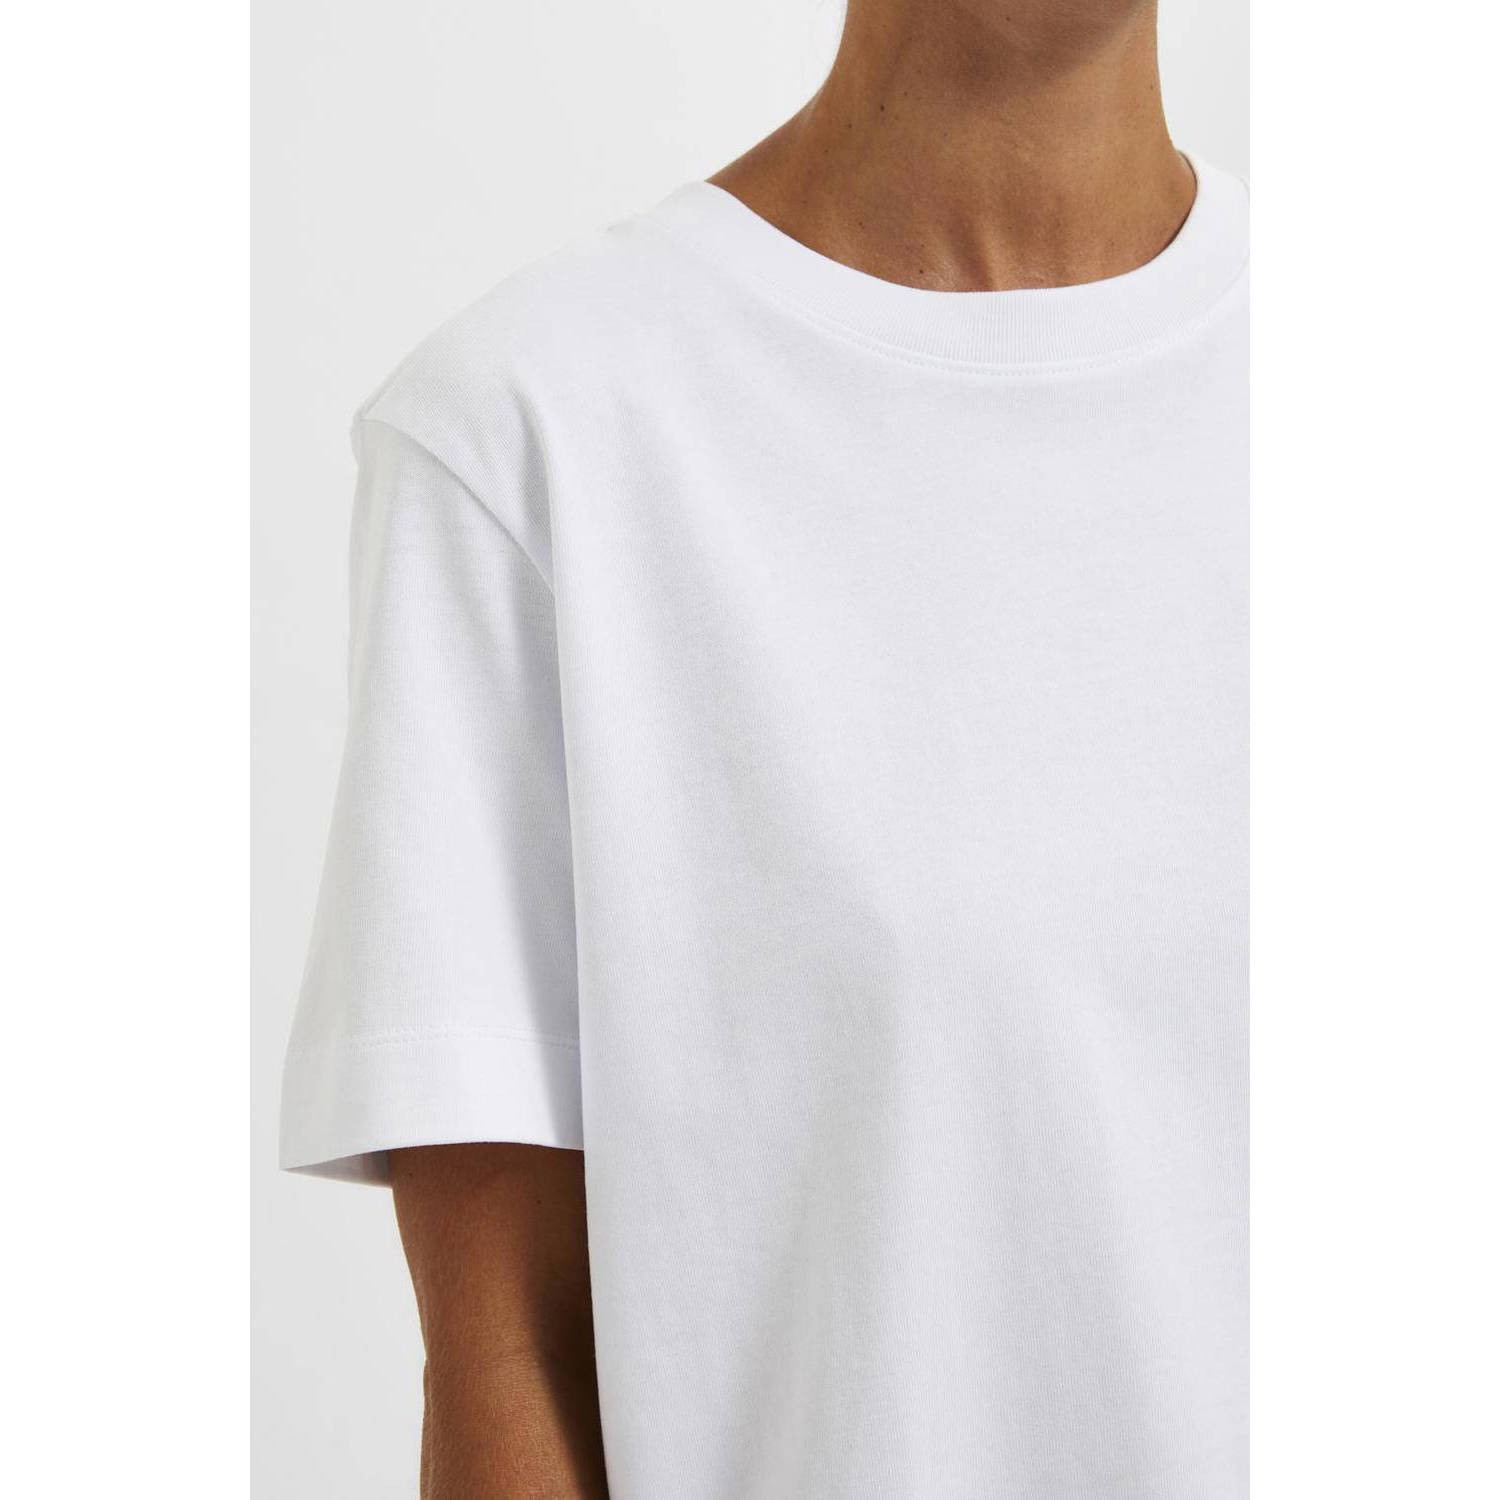 SELECTED FEMME T-shirt wit